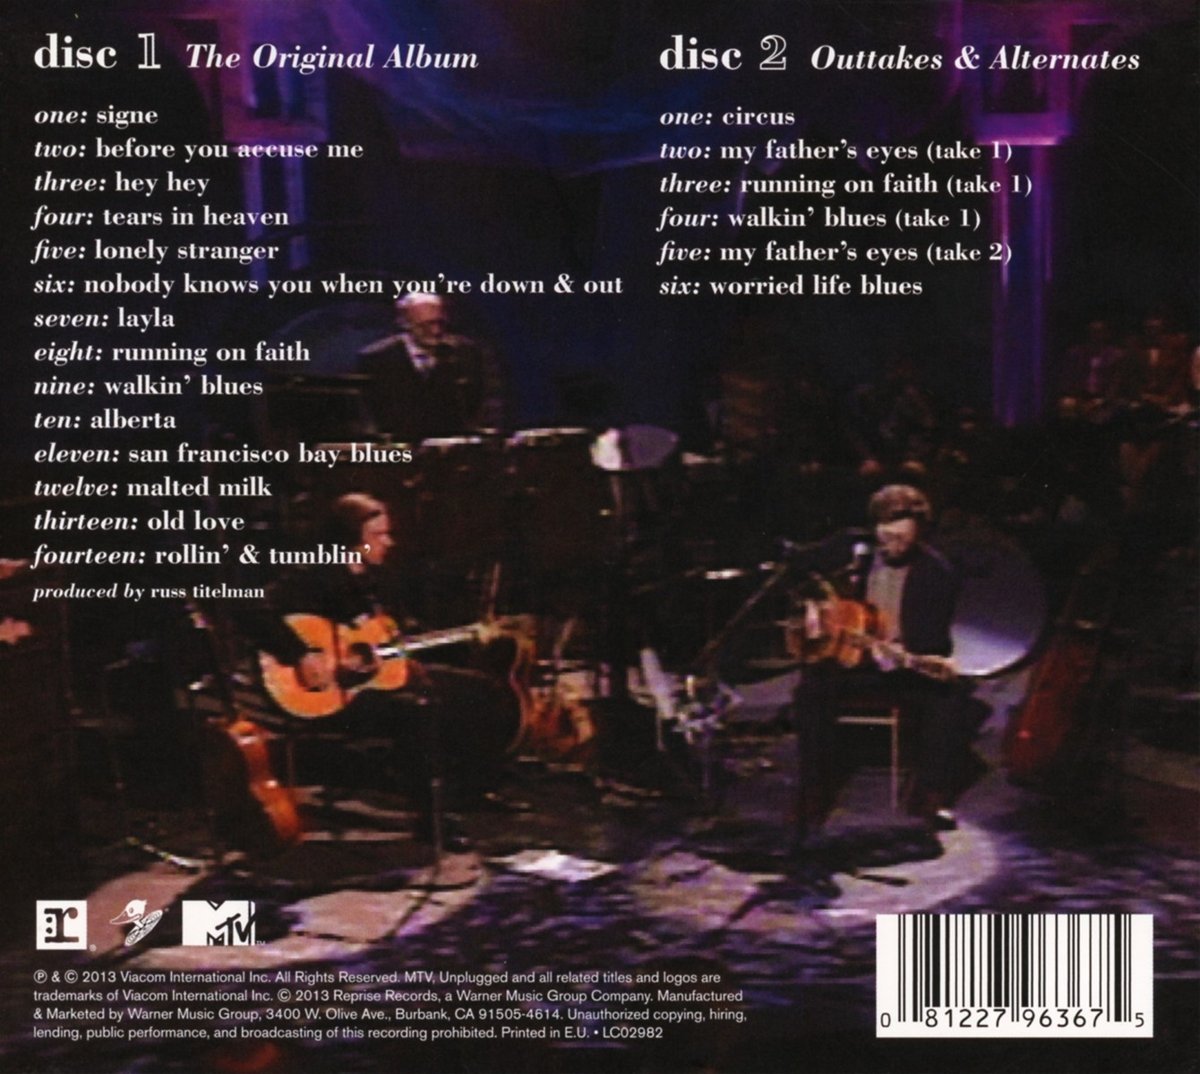 eric clapton unplugged deluxe edition dvd torrent